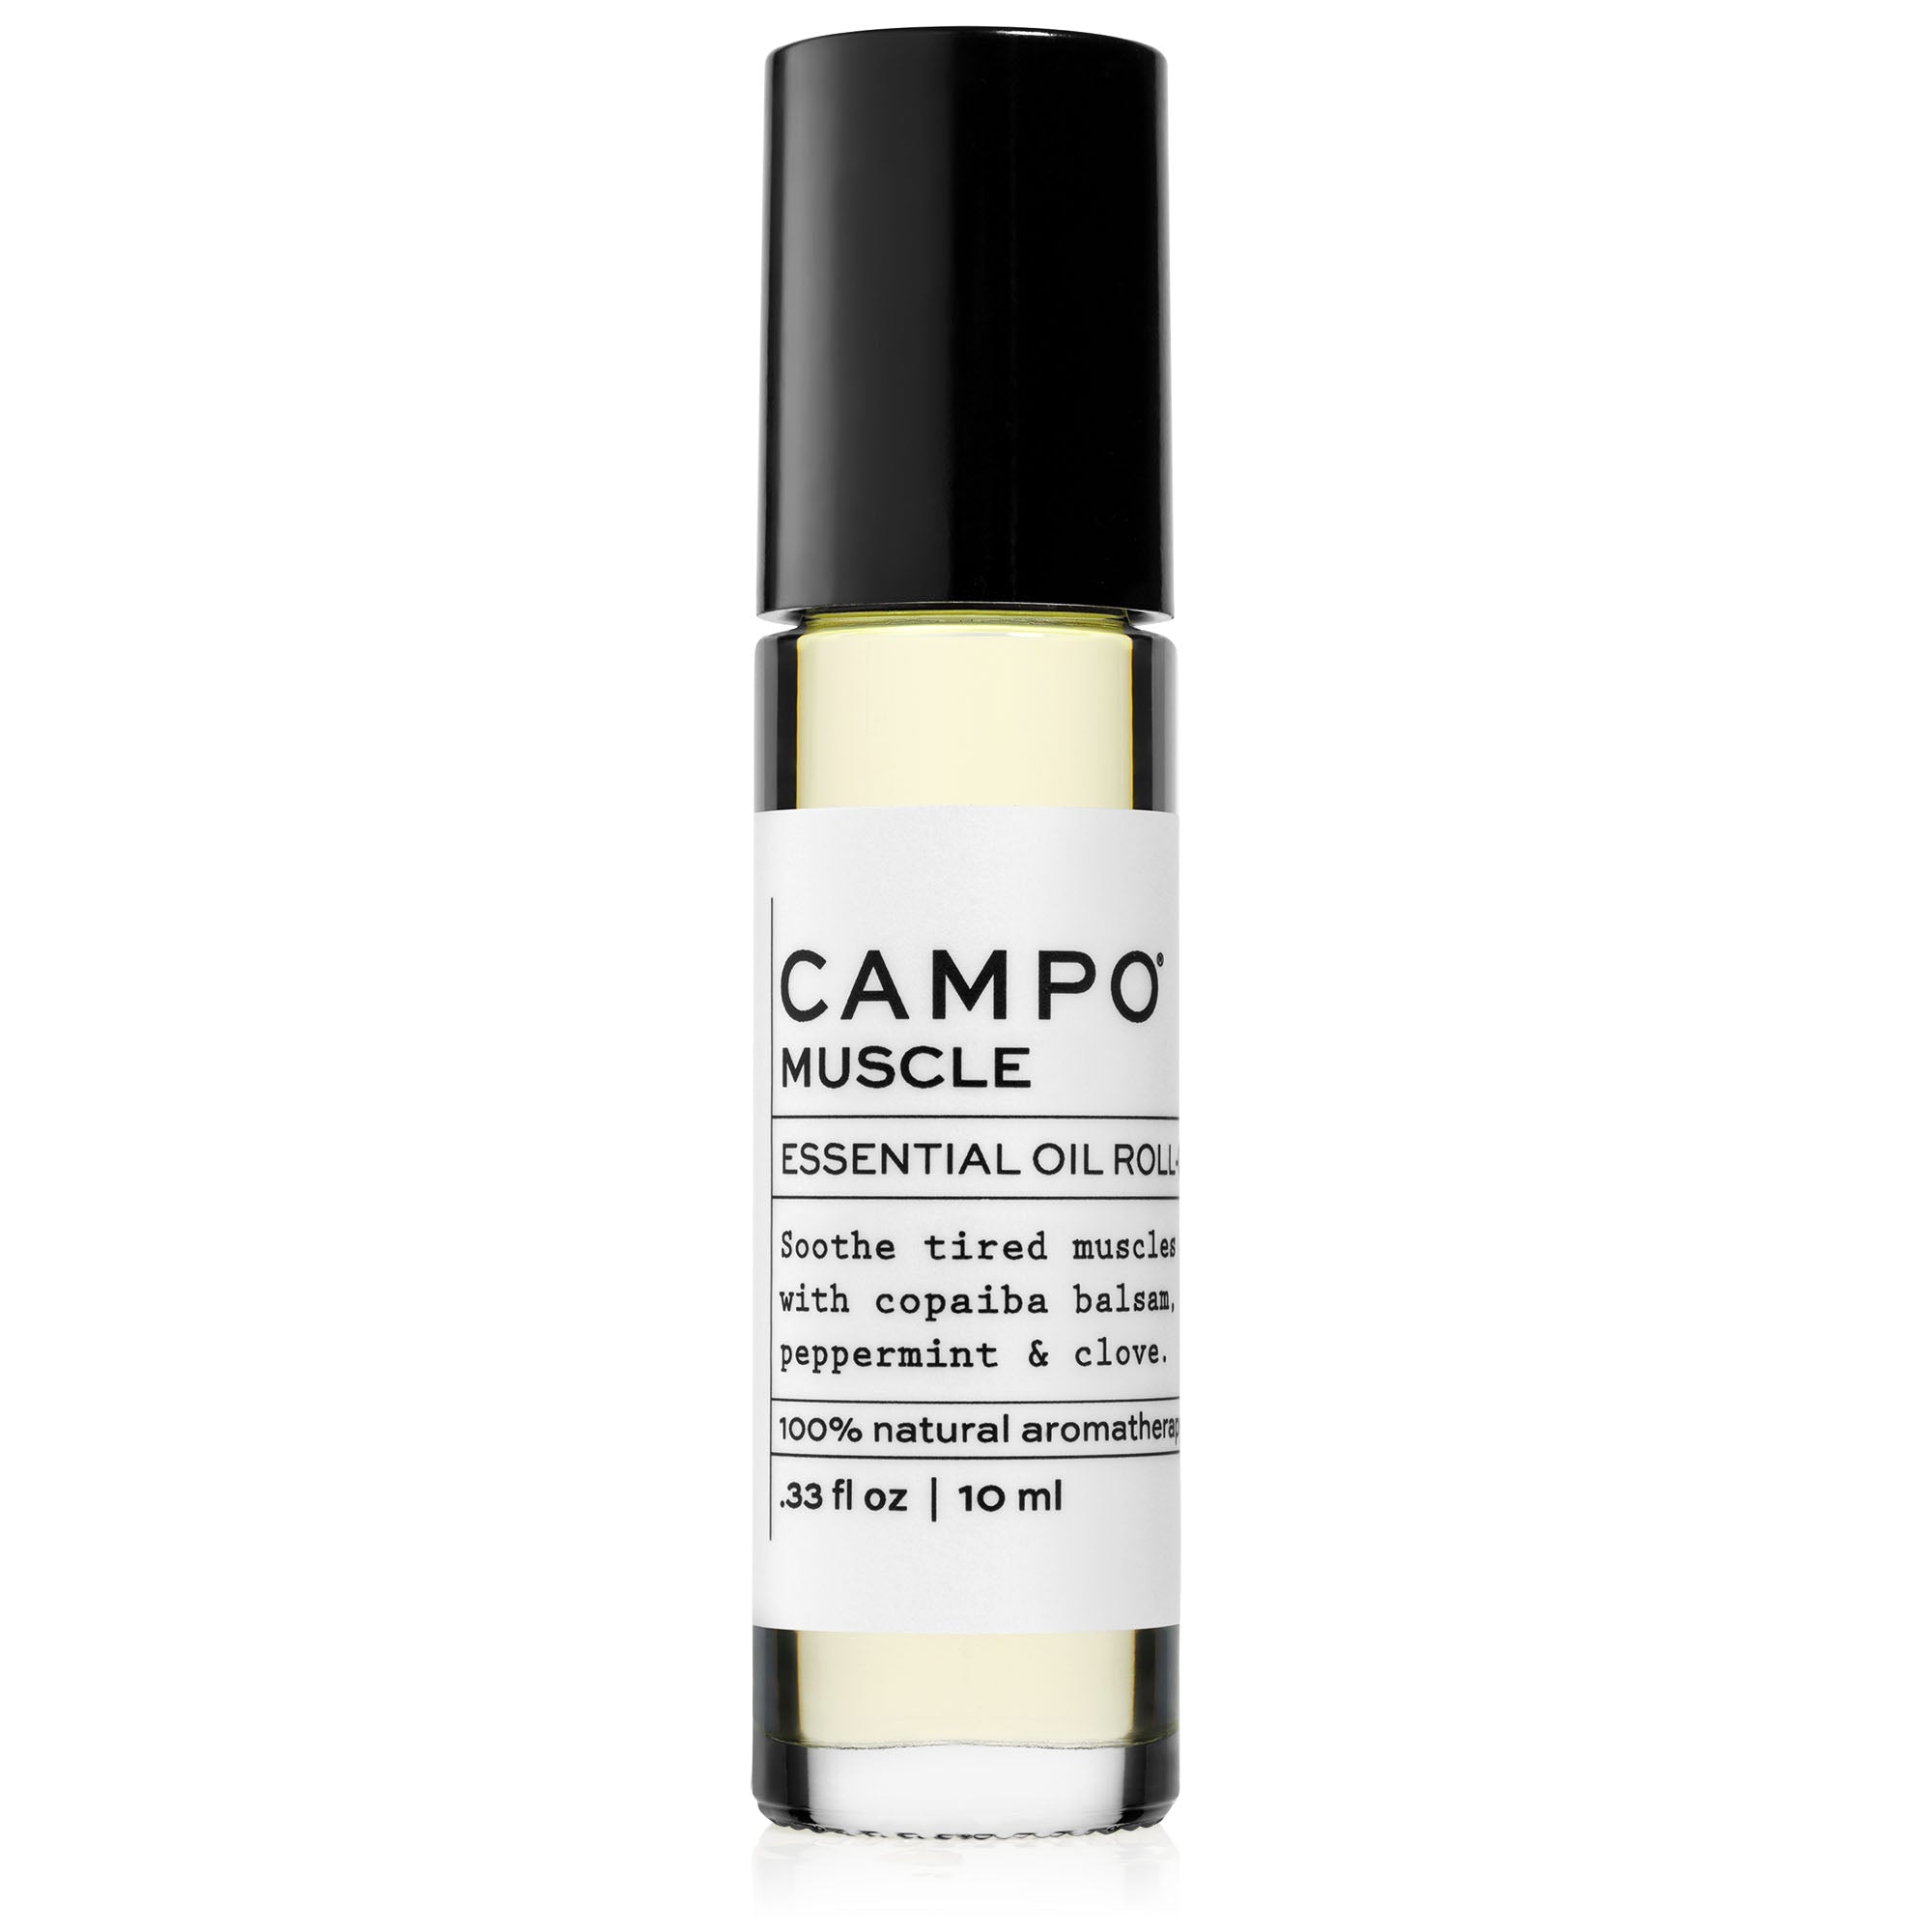 Campo Beauty Essential Oil MUSCLE Stretch Mark Relief Blend Roll-On that in 5 ml. Soothe sore muscles and pain. Relieve tension with this 100% natural essential oil roll-on blend of copaiba balsam, peppermint, eucalyptus & clove.